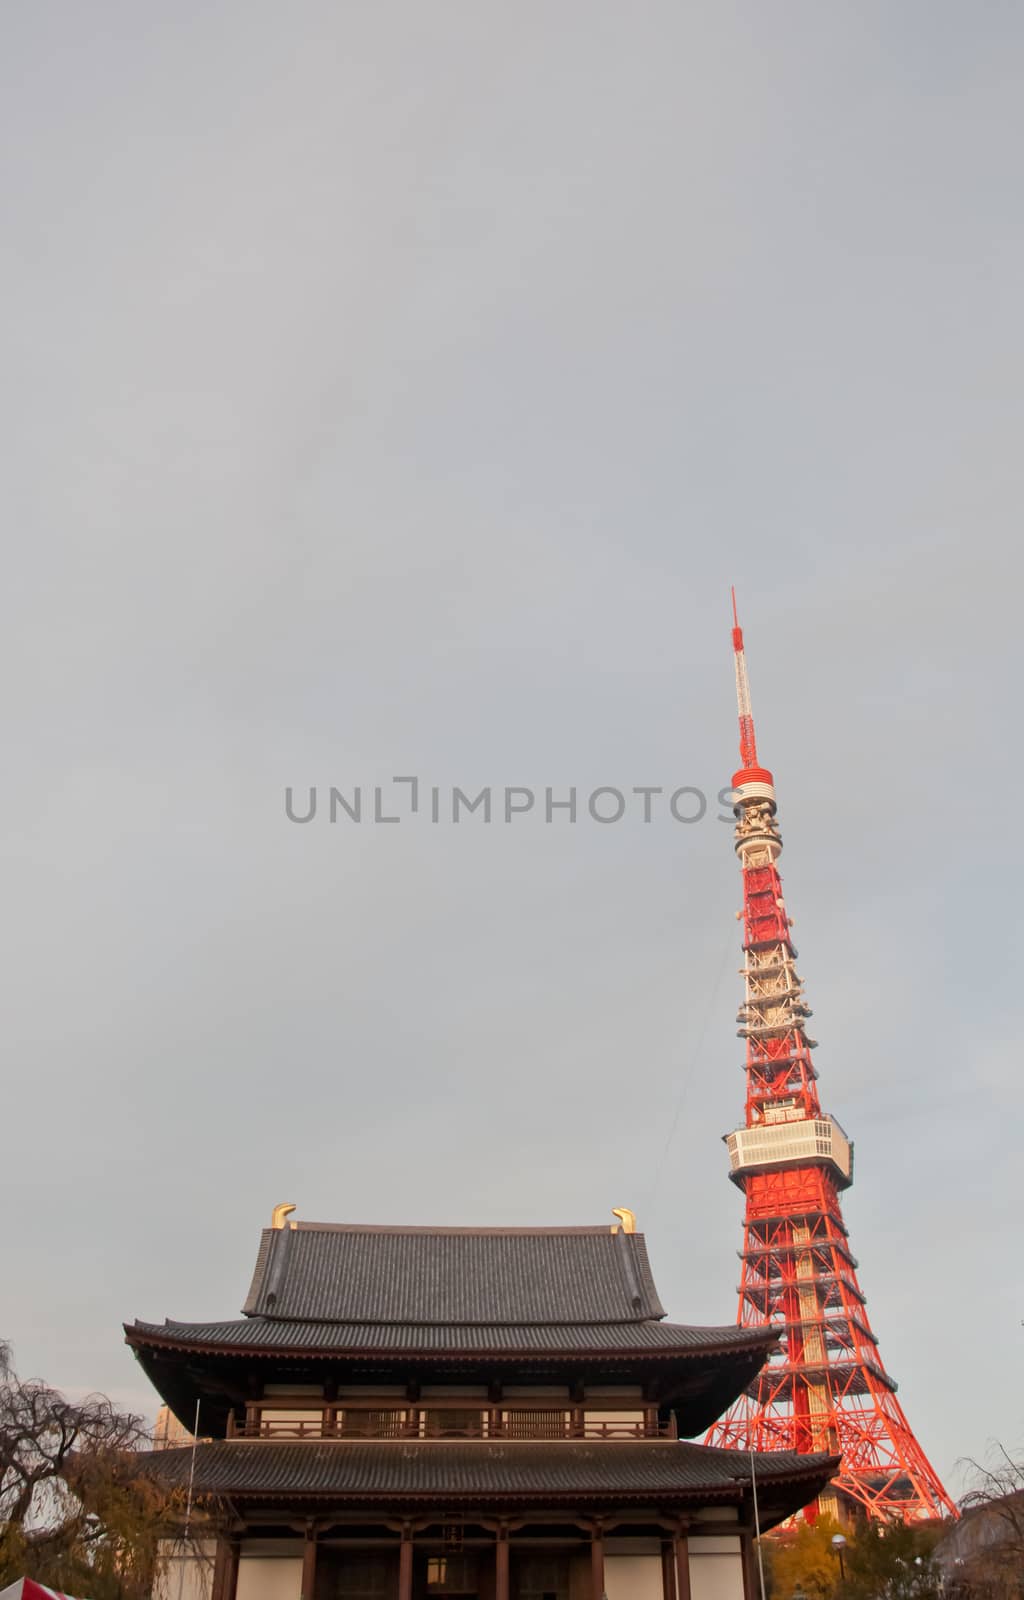 TOKYO, JAPAN - DECEMBER 1, 2018: Zojo-ji Buddhist temple. This is a famous temple which has the oldest wooden main gate in Tokyo built from 1622. There is Tokyo Tower near the temple. There are beautiful yellow leaves trees park in front of the temple.